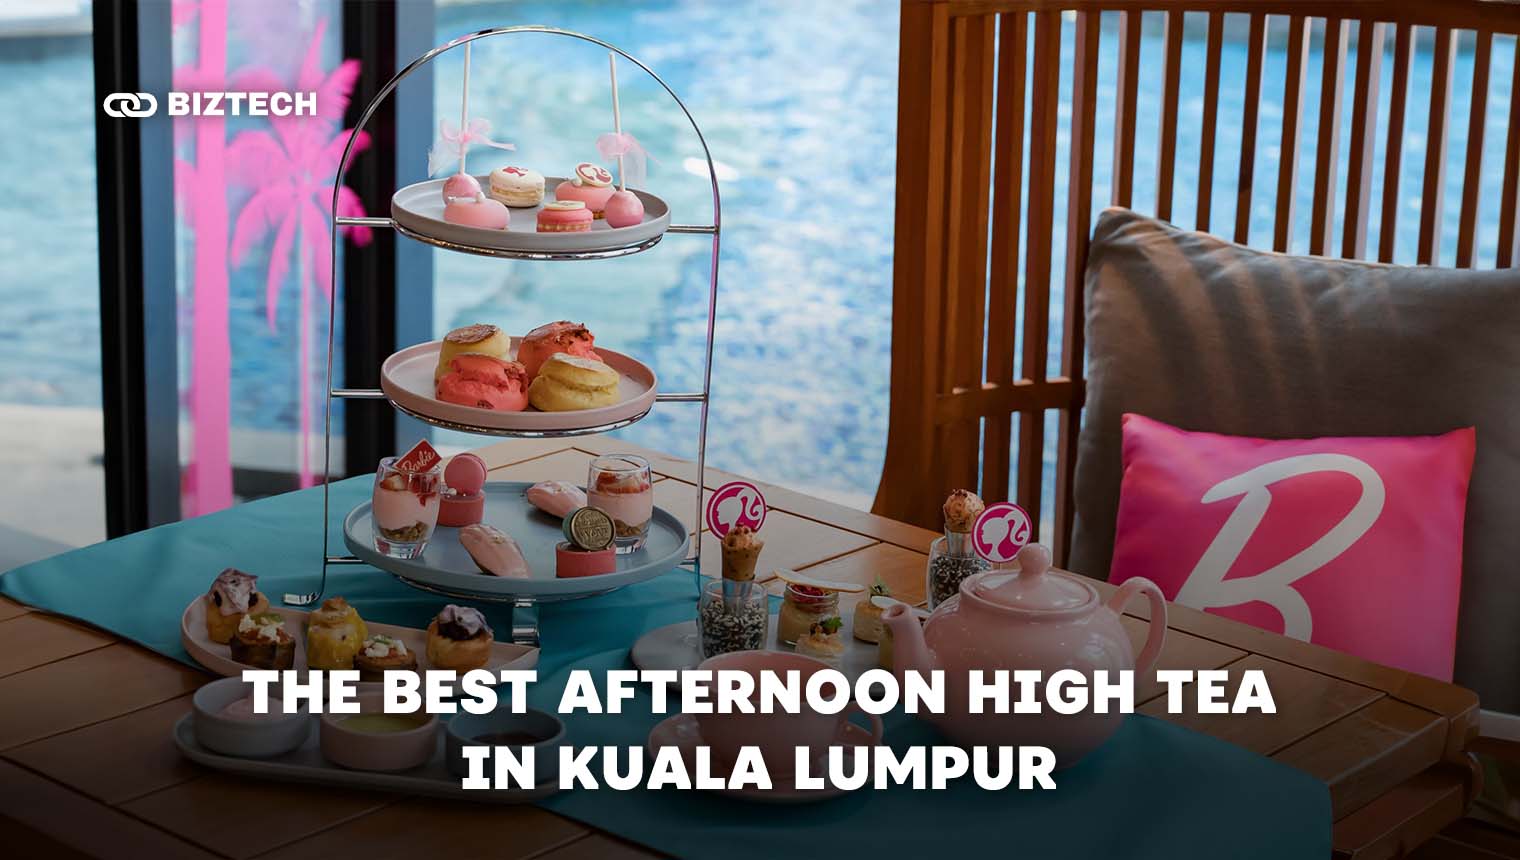 The Best Afternoon High Tea In Kuala Lumpur